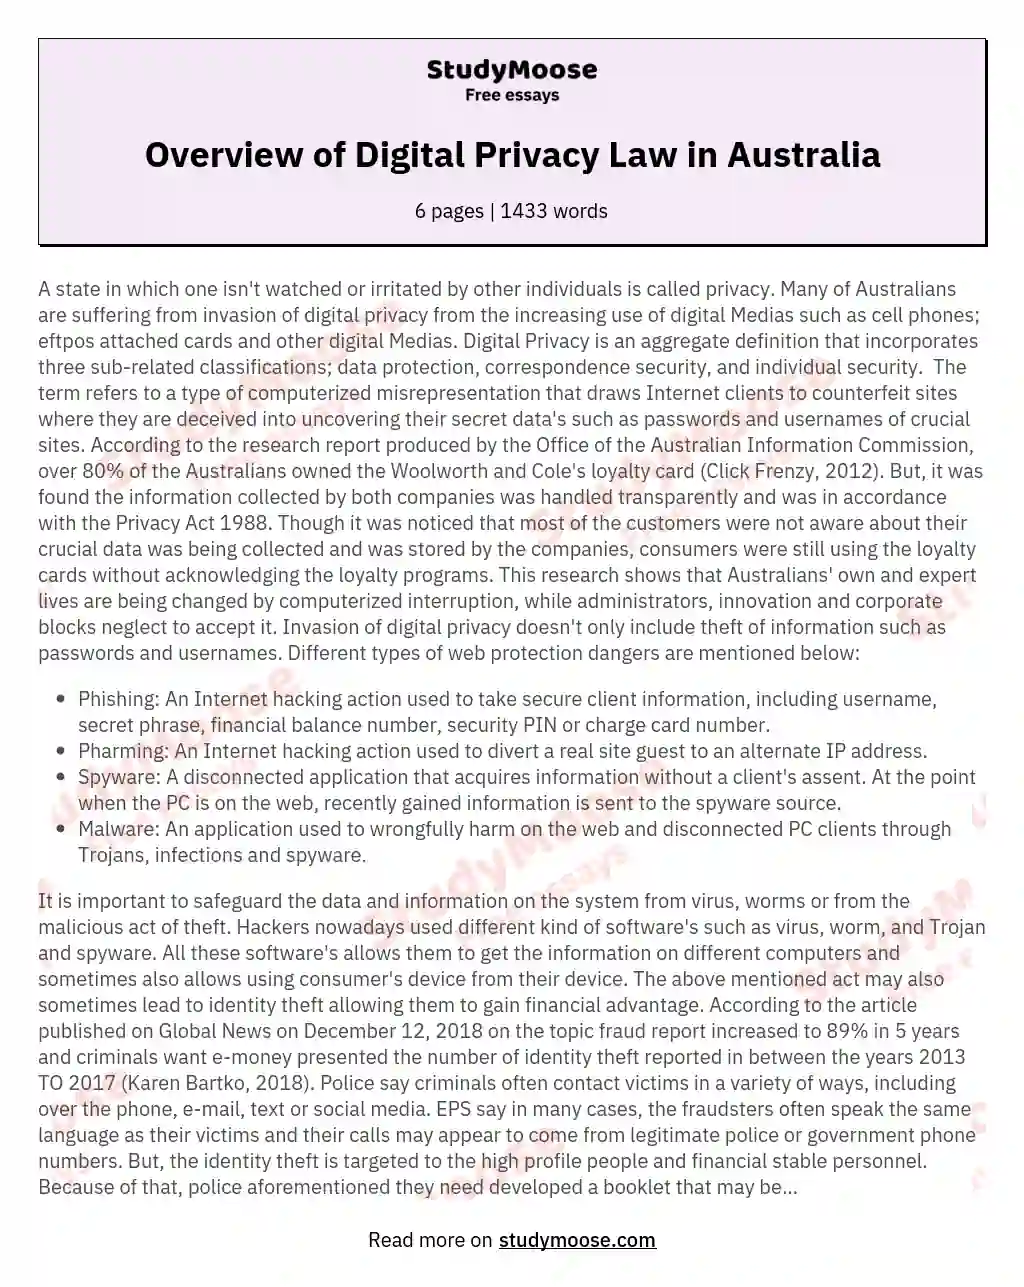 Overview of Digital Privacy Law in Australia essay